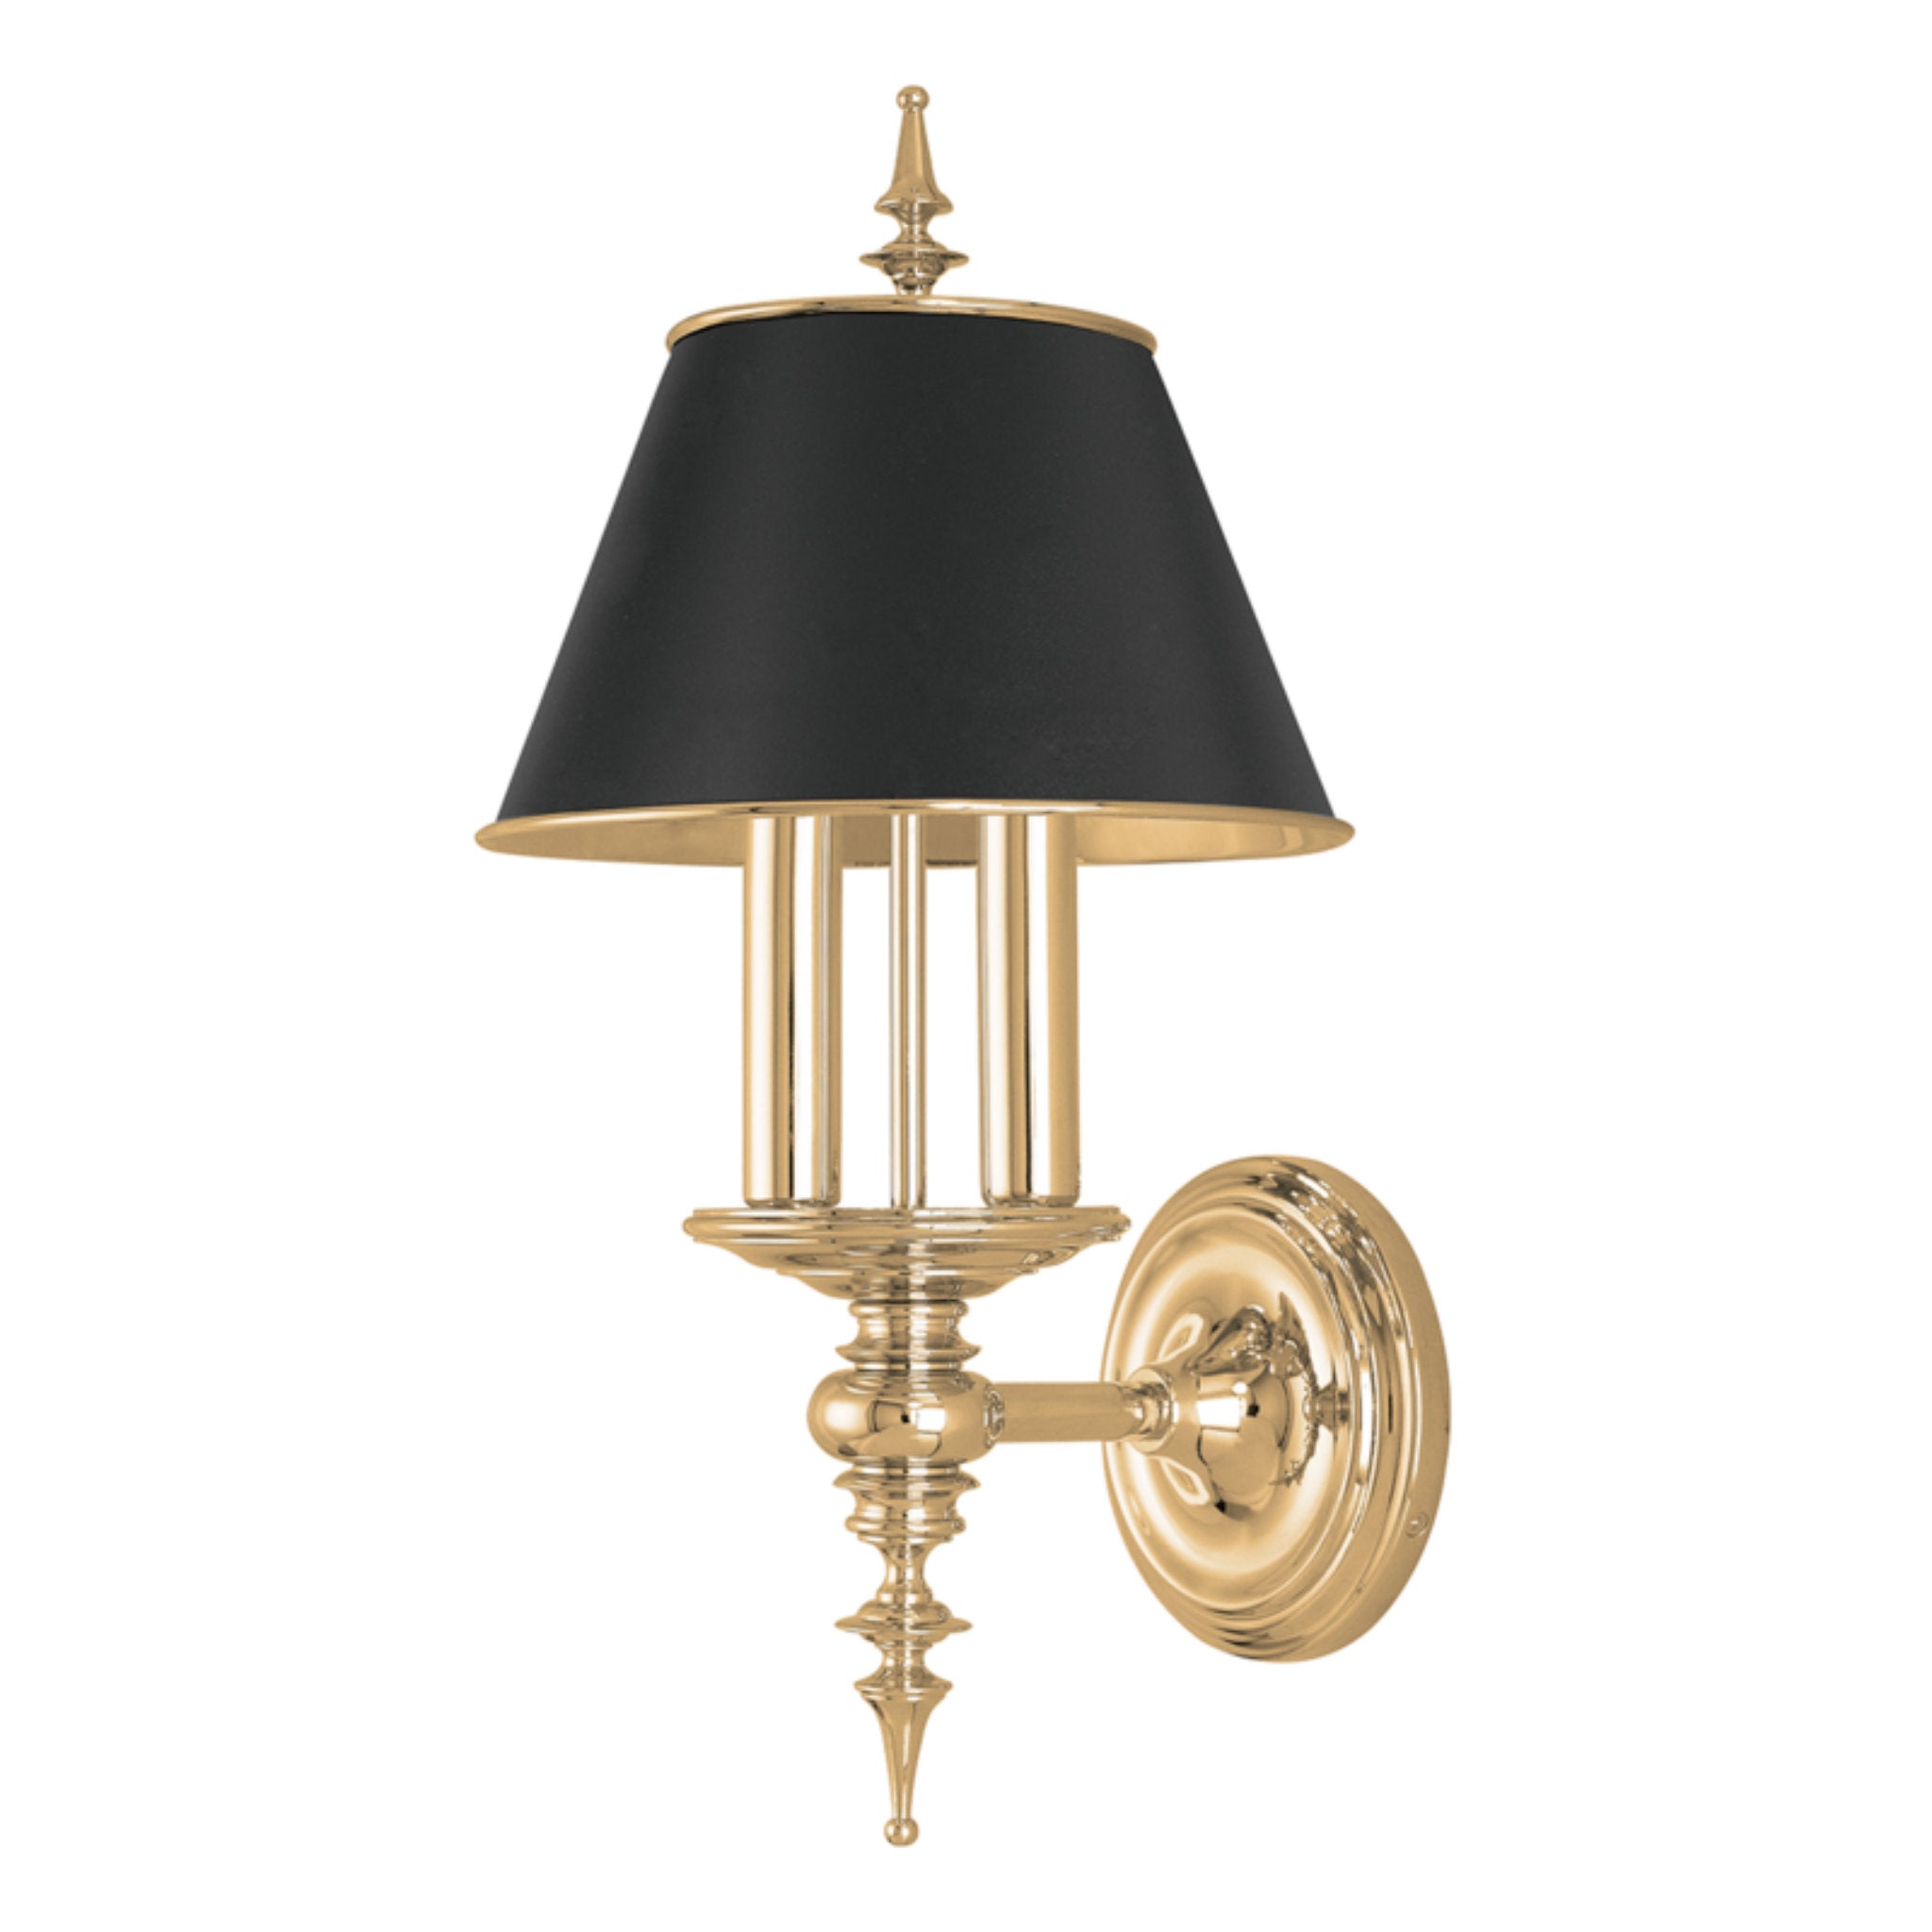 Cheshire 2 Light Wall Sconce in Aged Brass